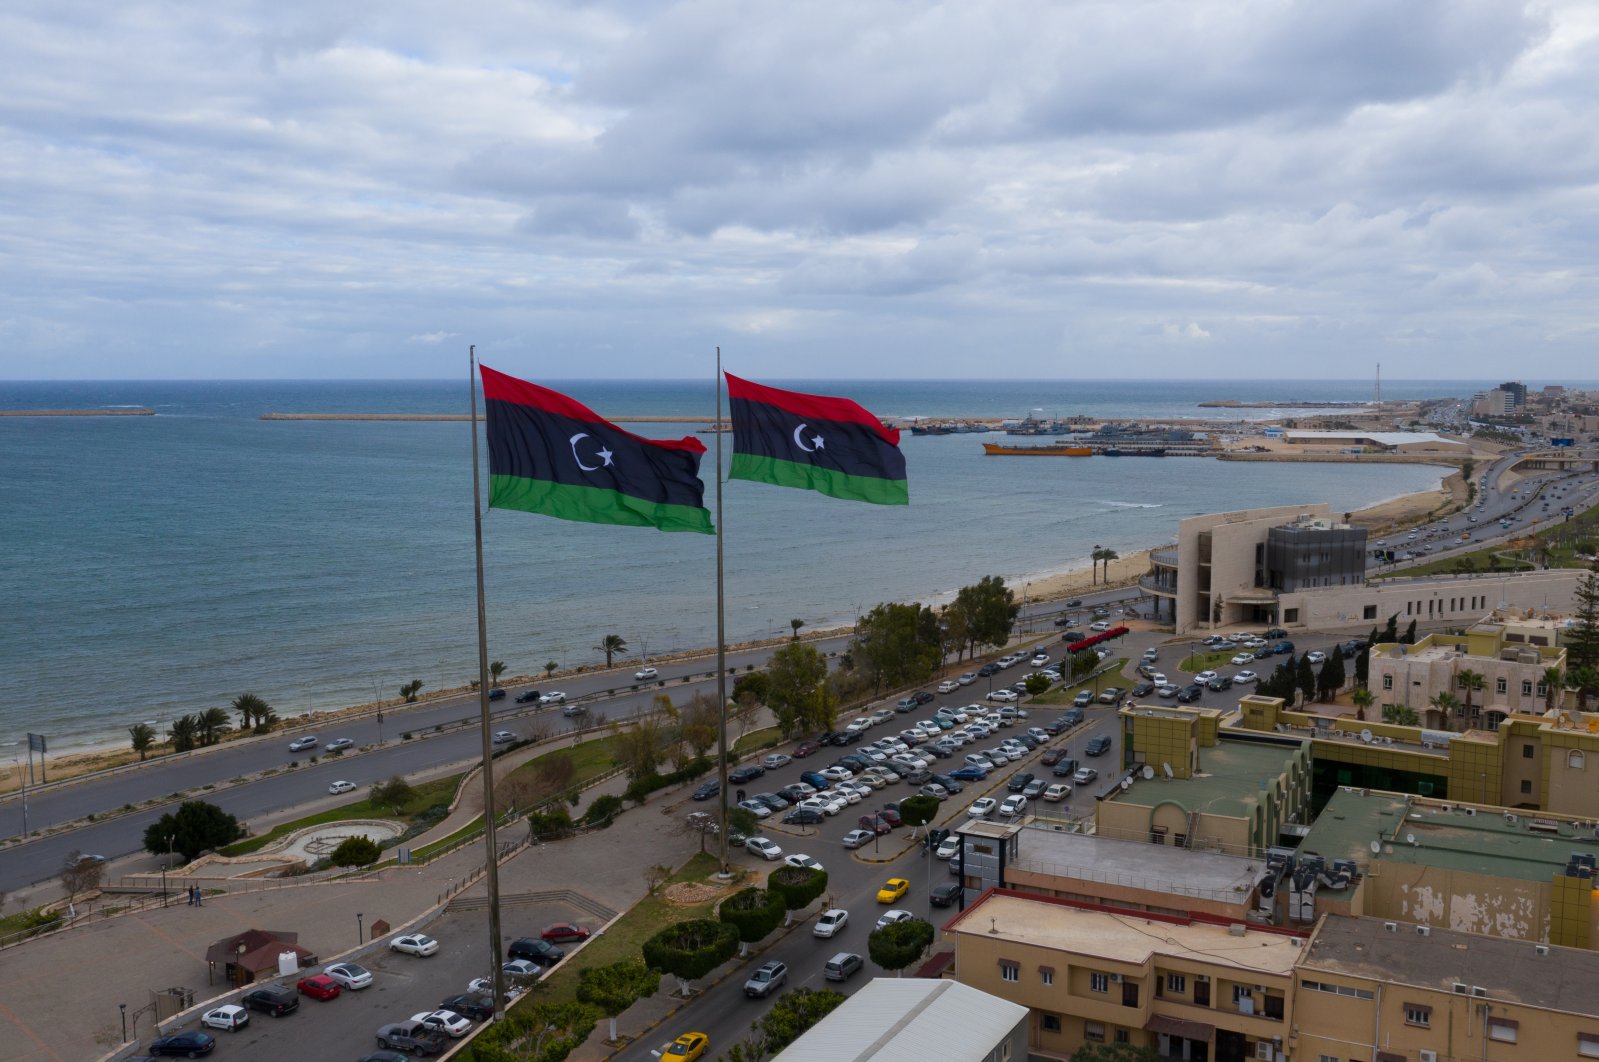 Libyan flags flying over a street in the capital Tripoli, Libya, Feb. 14, 2021. (Photo by Shutterstock)